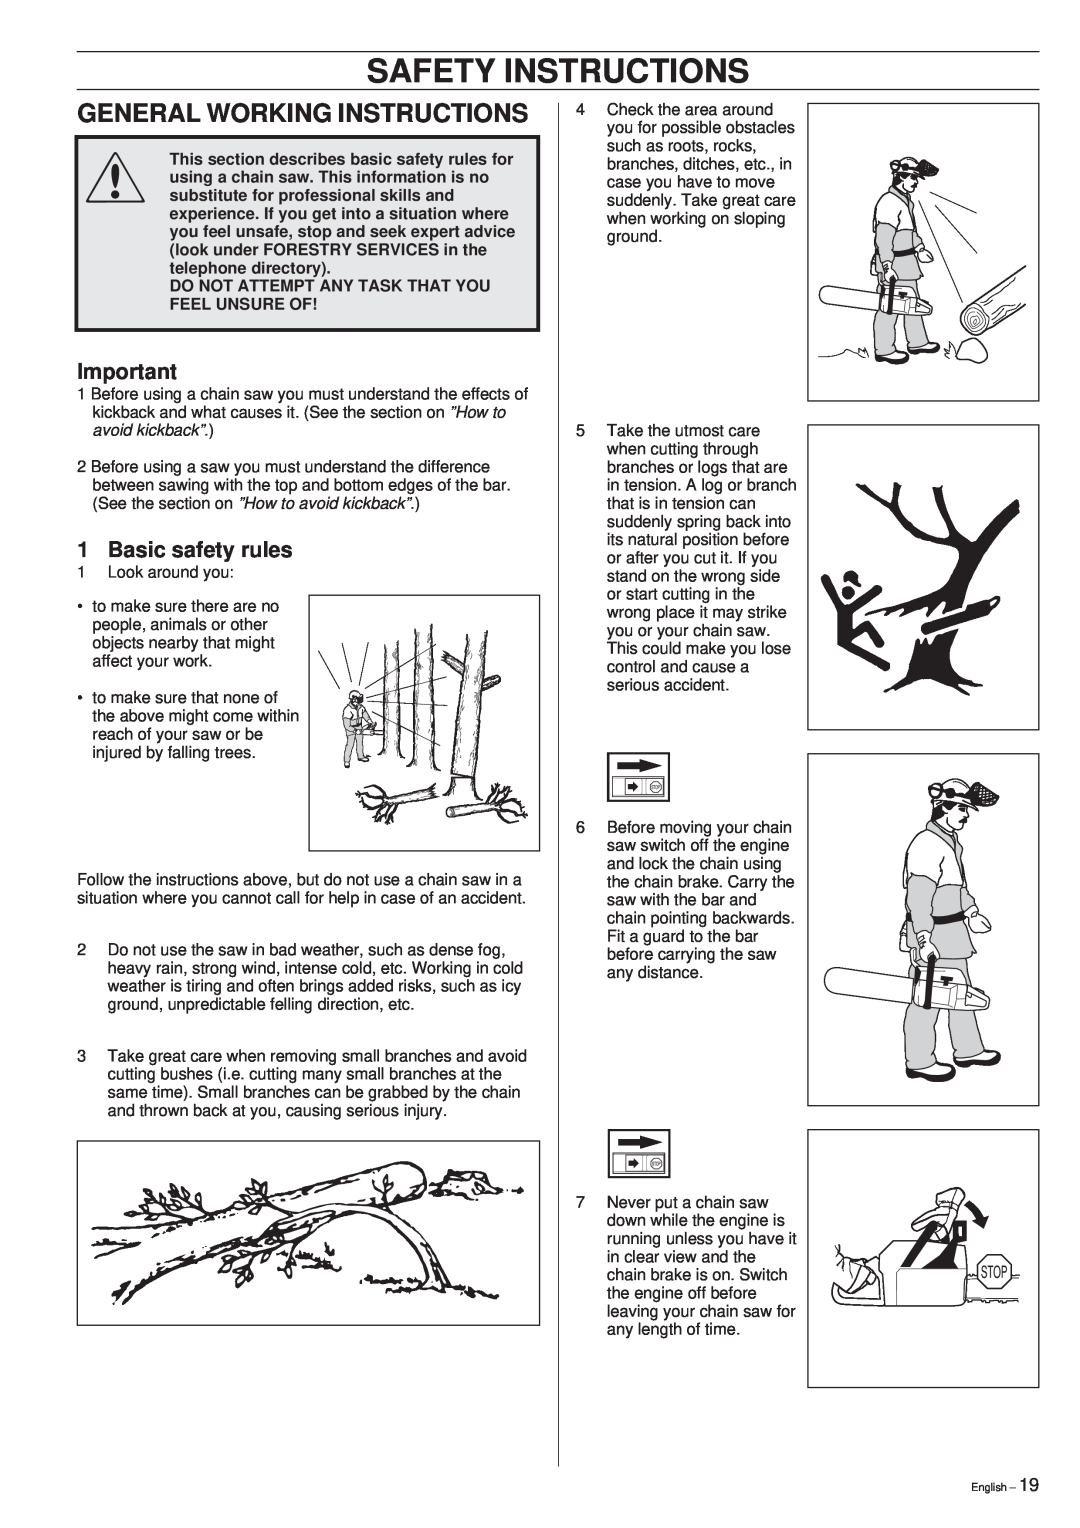 Husqvarna 45 manual Safety Instructions, General Working Instructions, Basic safety rules 